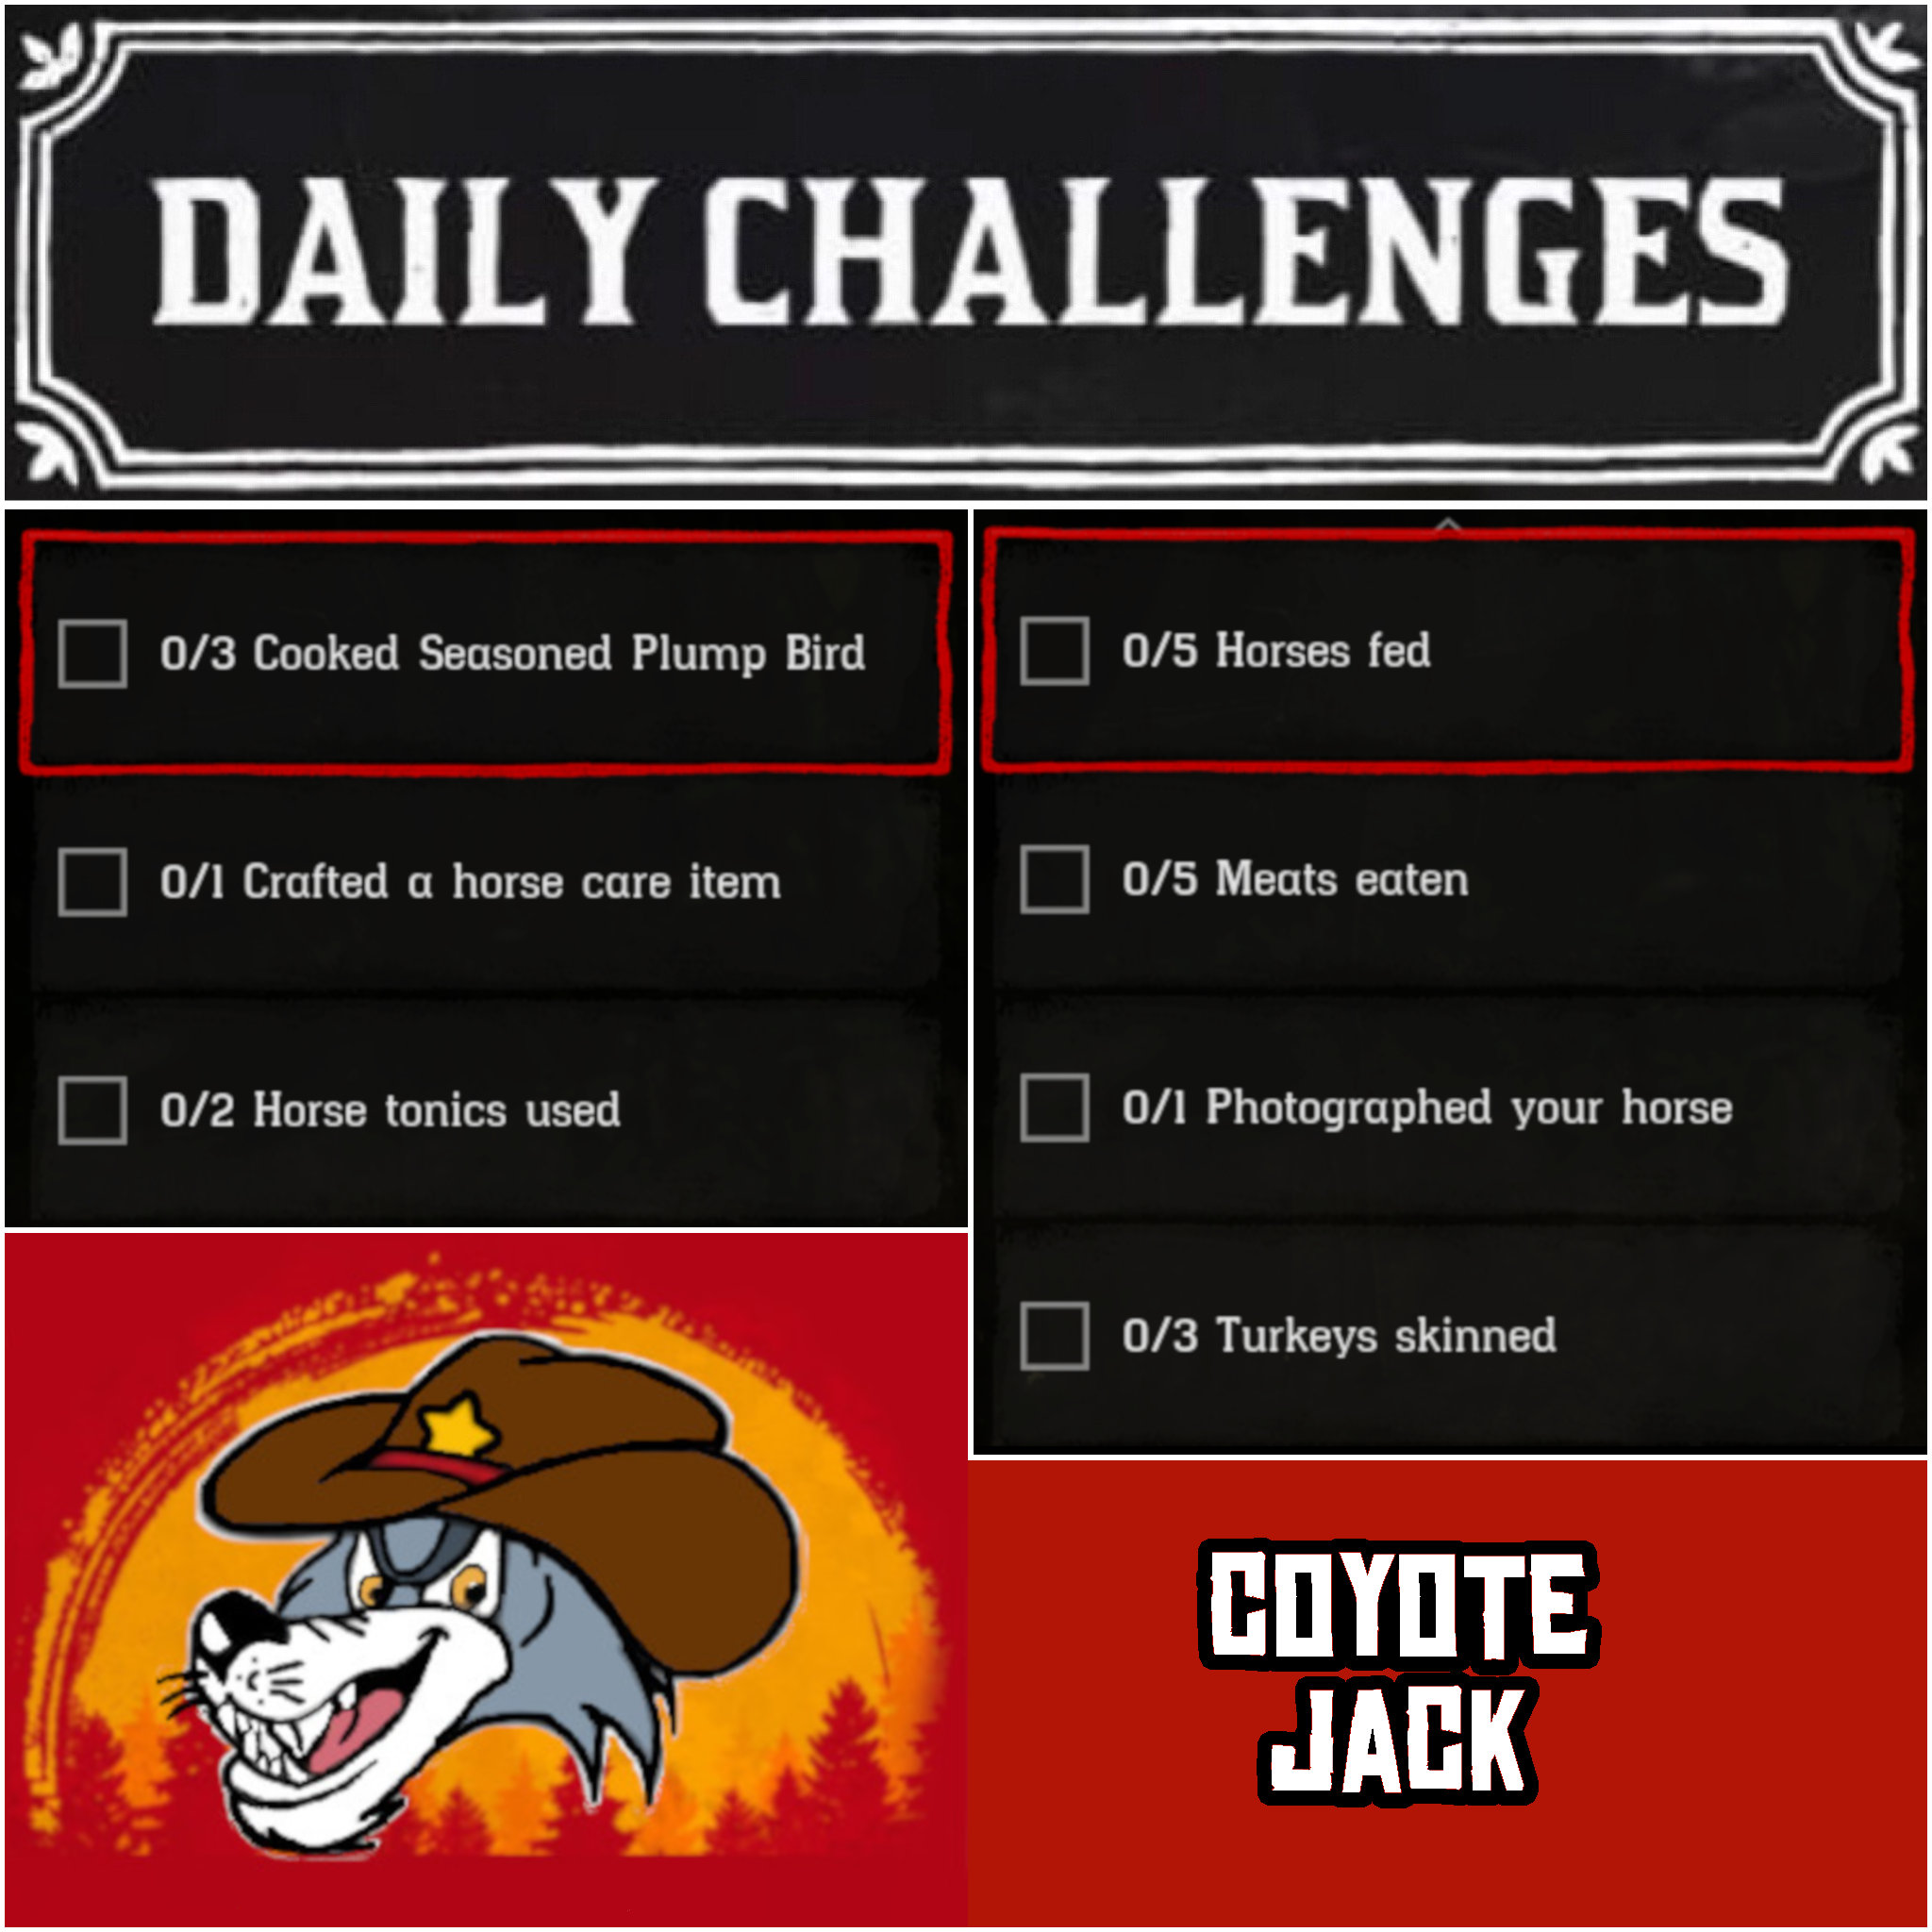 You are currently viewing Thursday 26 November Daily Challenges